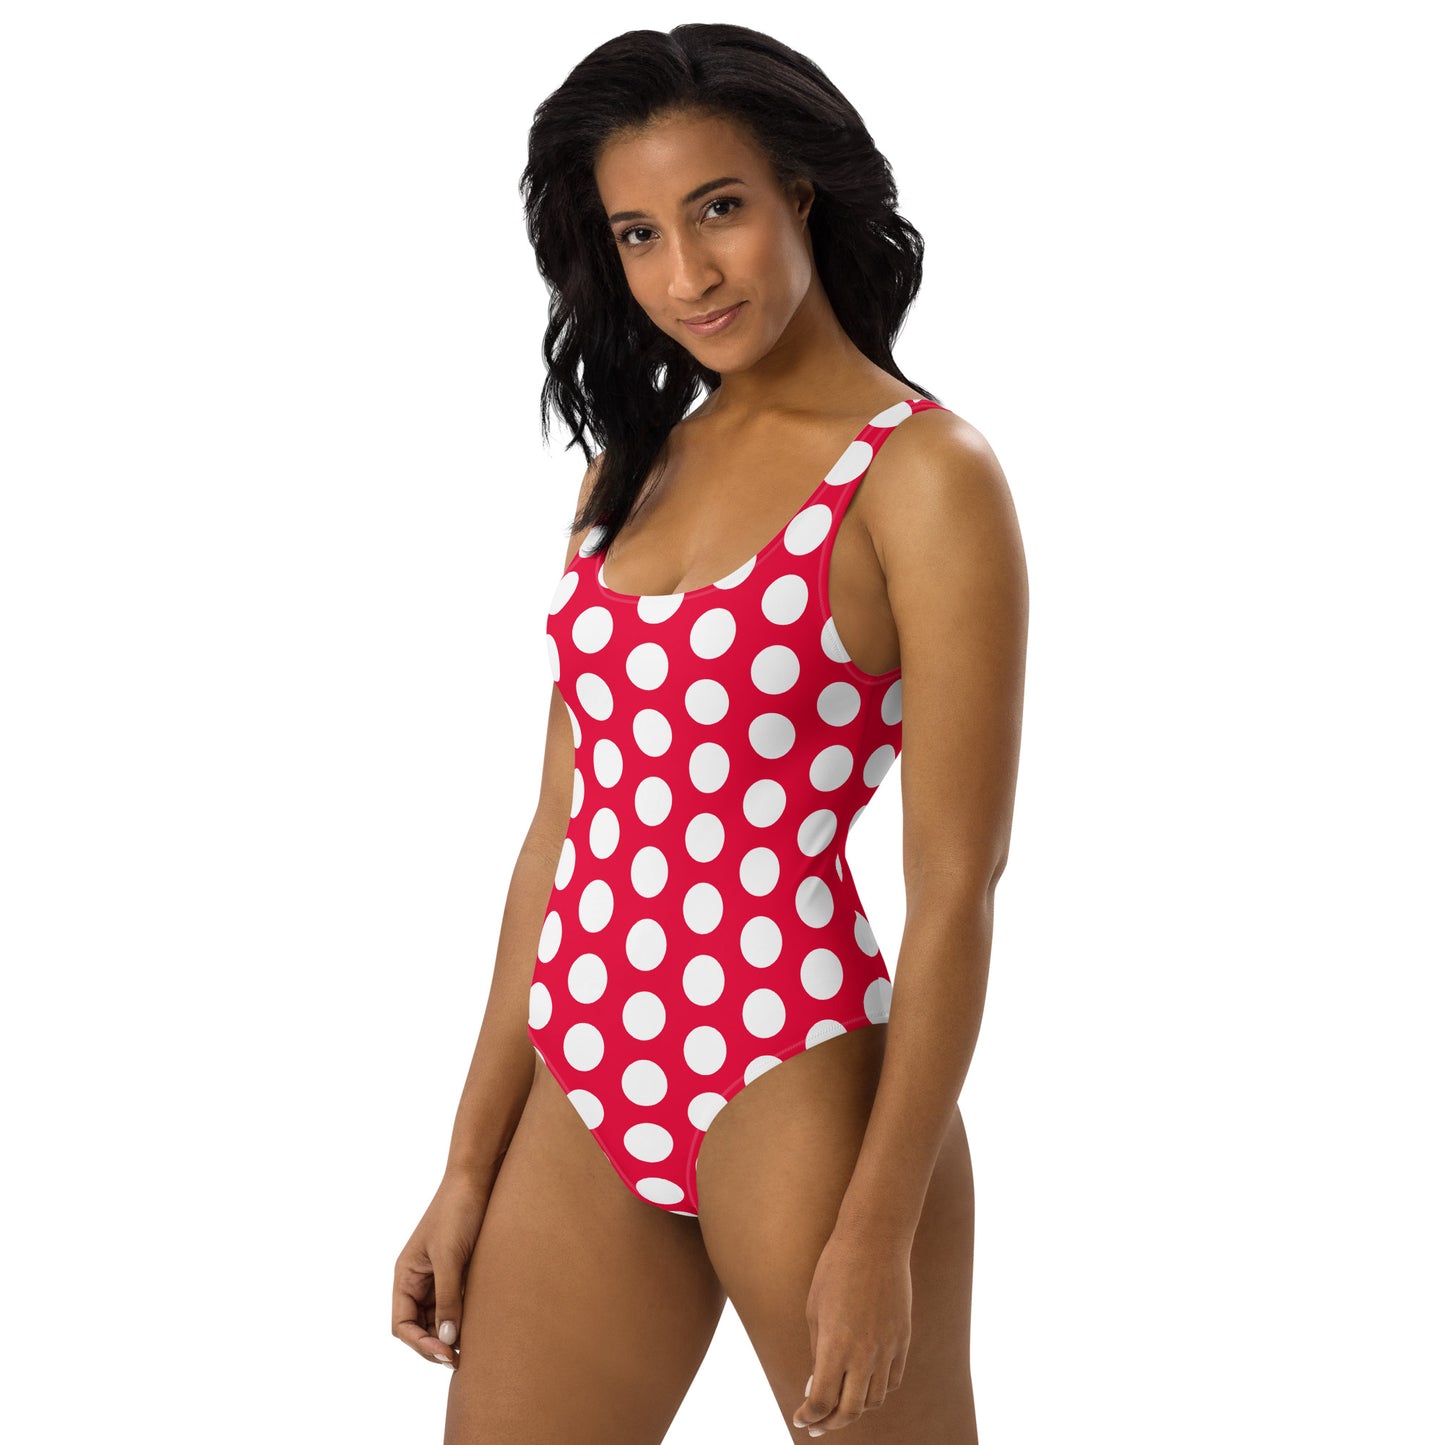 Red Hot Polka Dot One-Piece Swimsuit